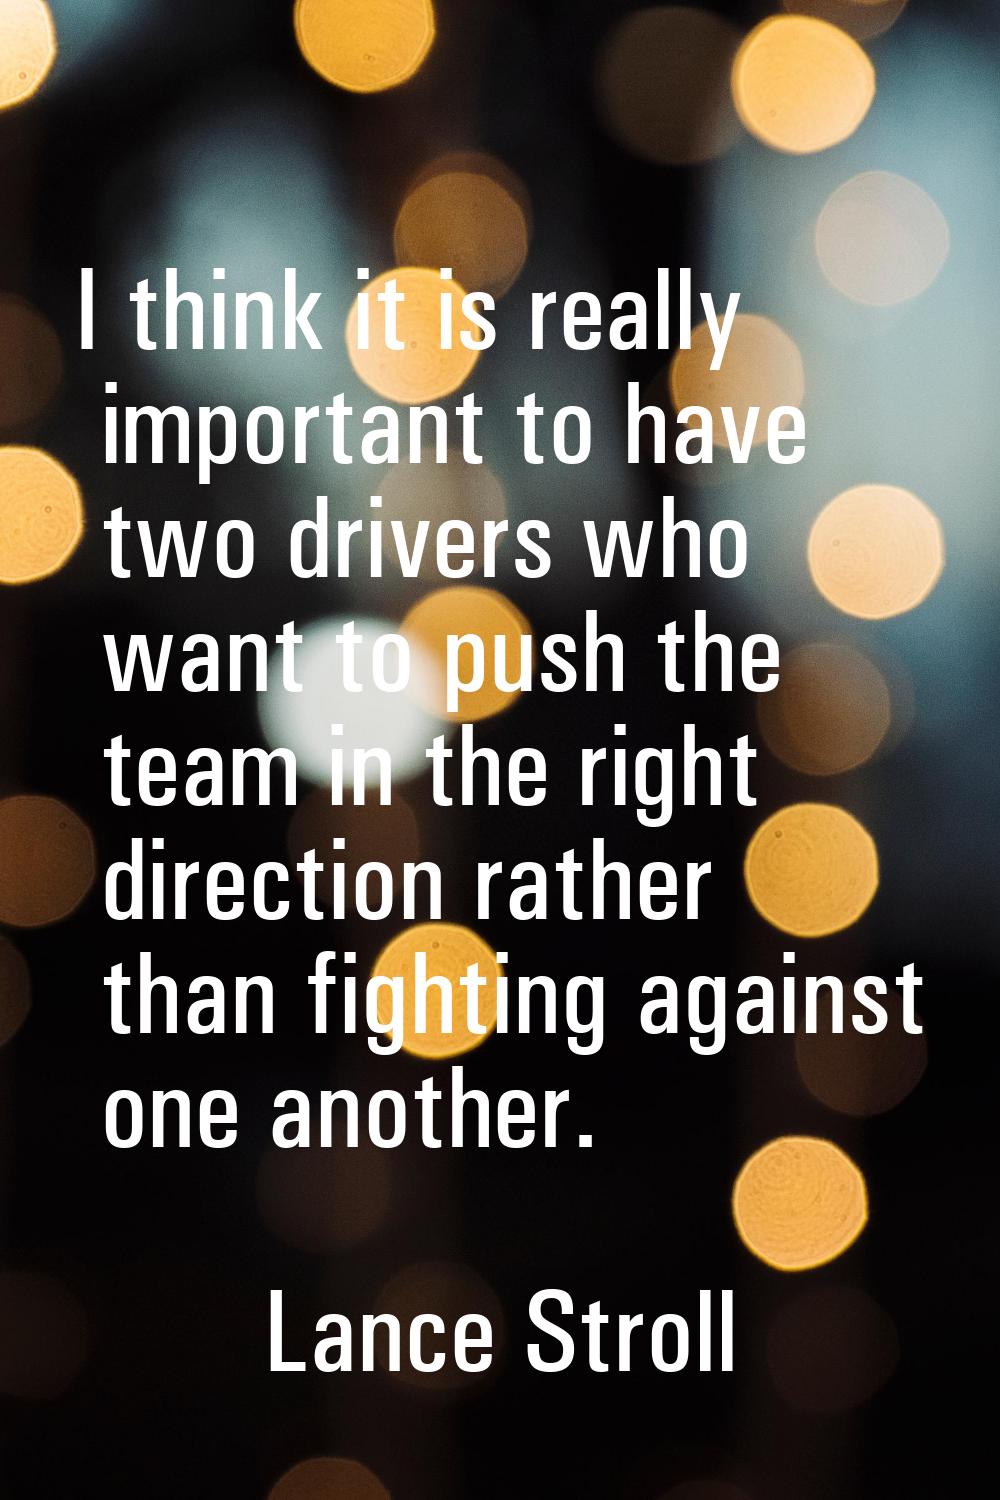 I think it is really important to have two drivers who want to push the team in the right direction